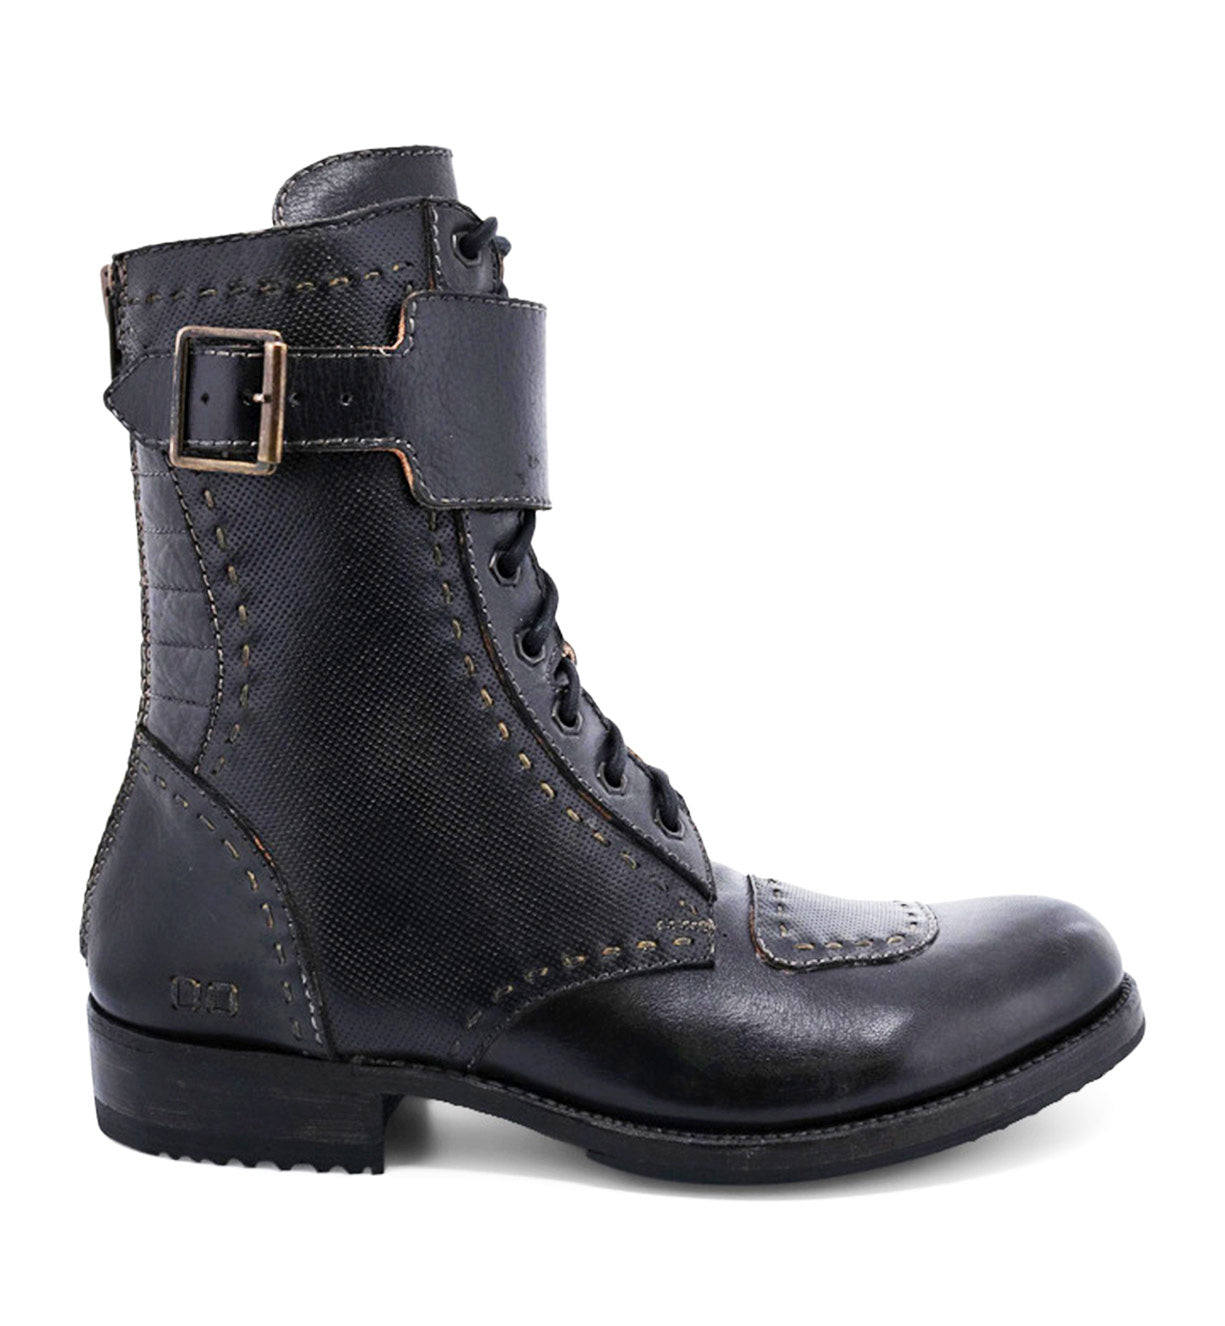 Black leather moto-inspired Walker boot with a buckle, lace-up front, and detailed stitching, isolated on a white background by Bed Stu.